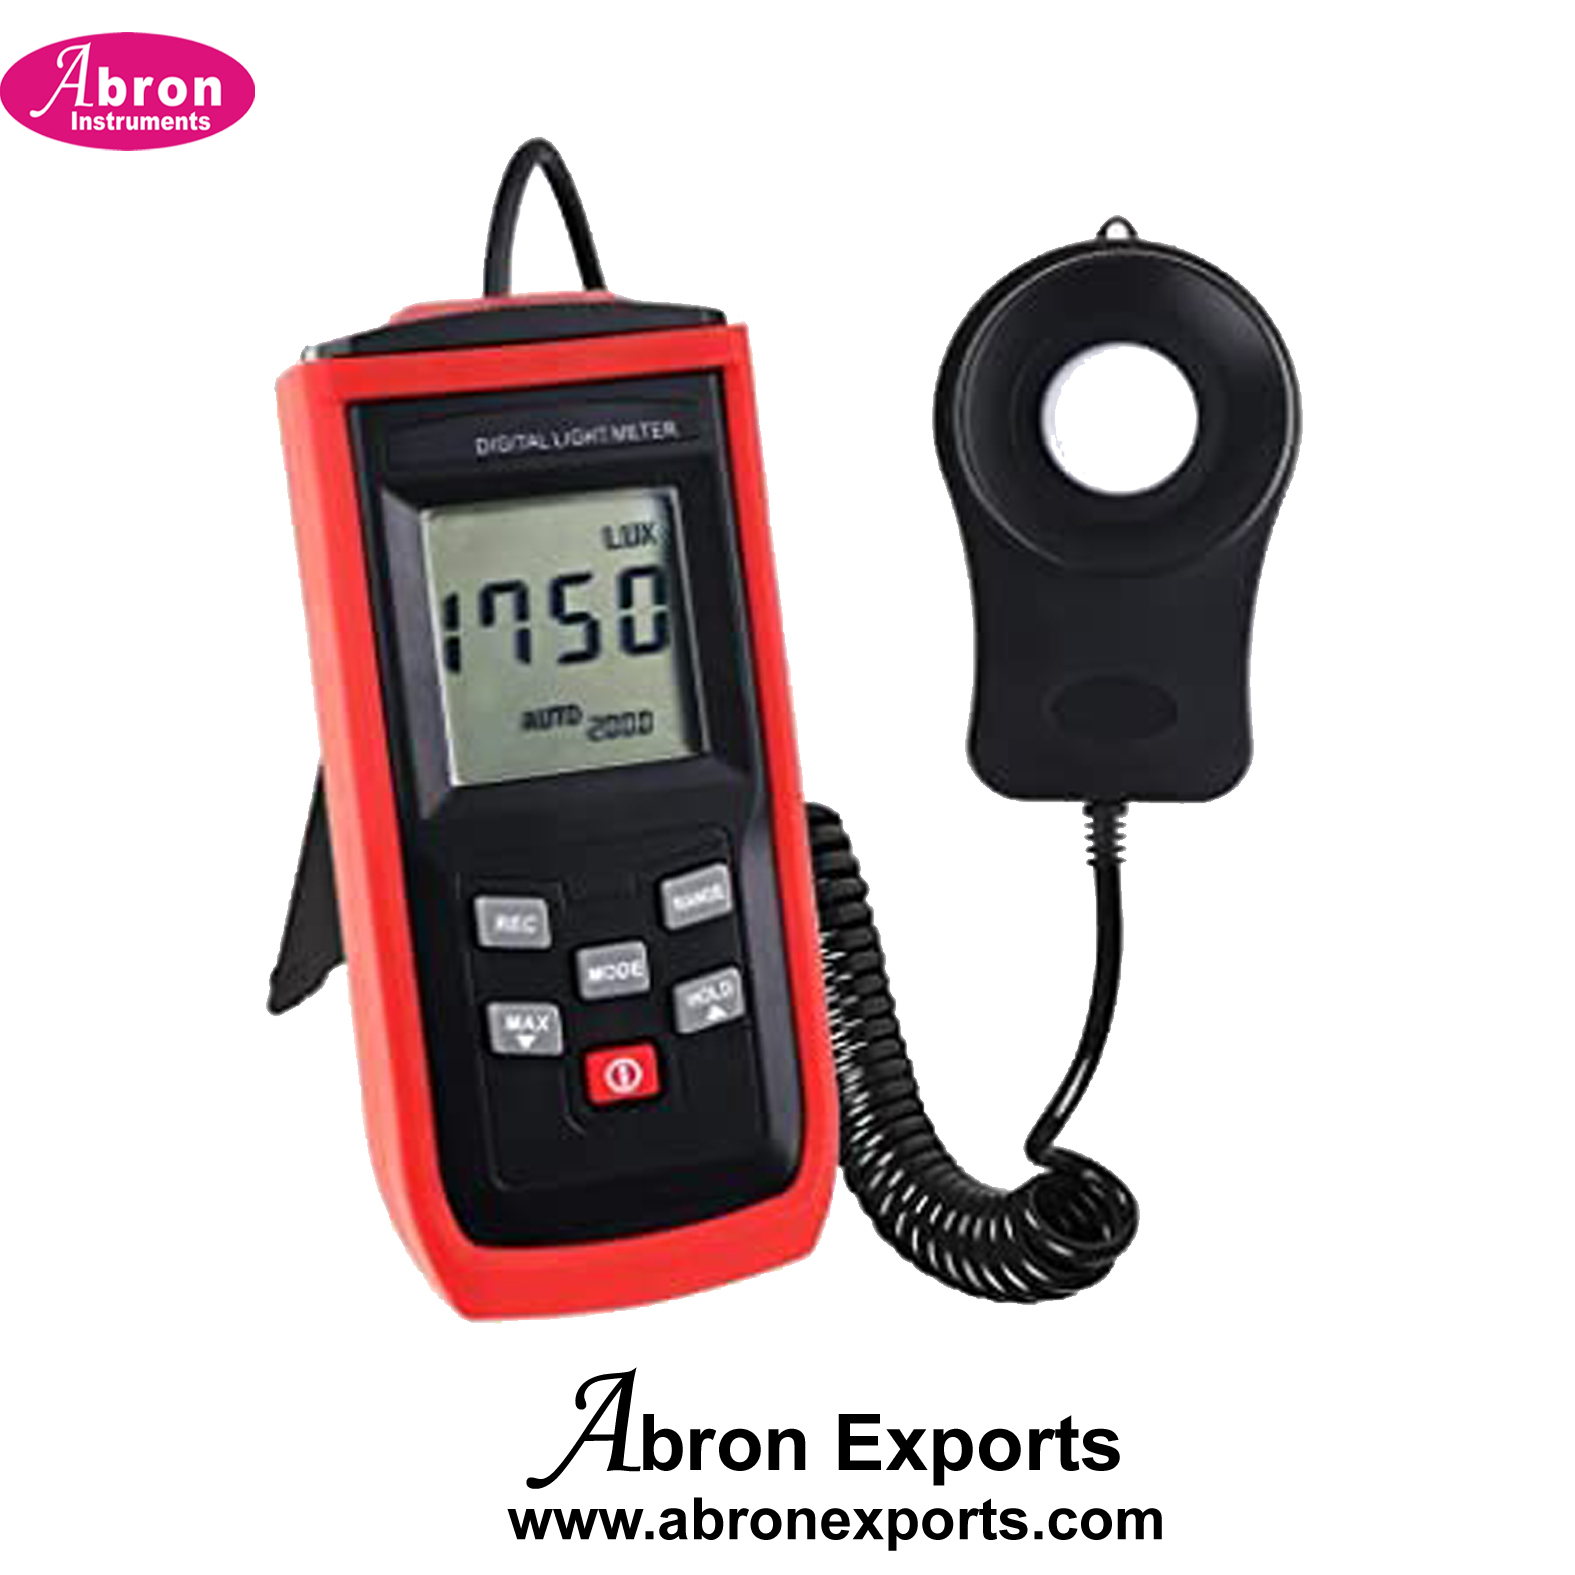 Lux meter light intensity meter with 50 records 0-200000 Lux with wire sensor accurate Abron AE-1320D2L 